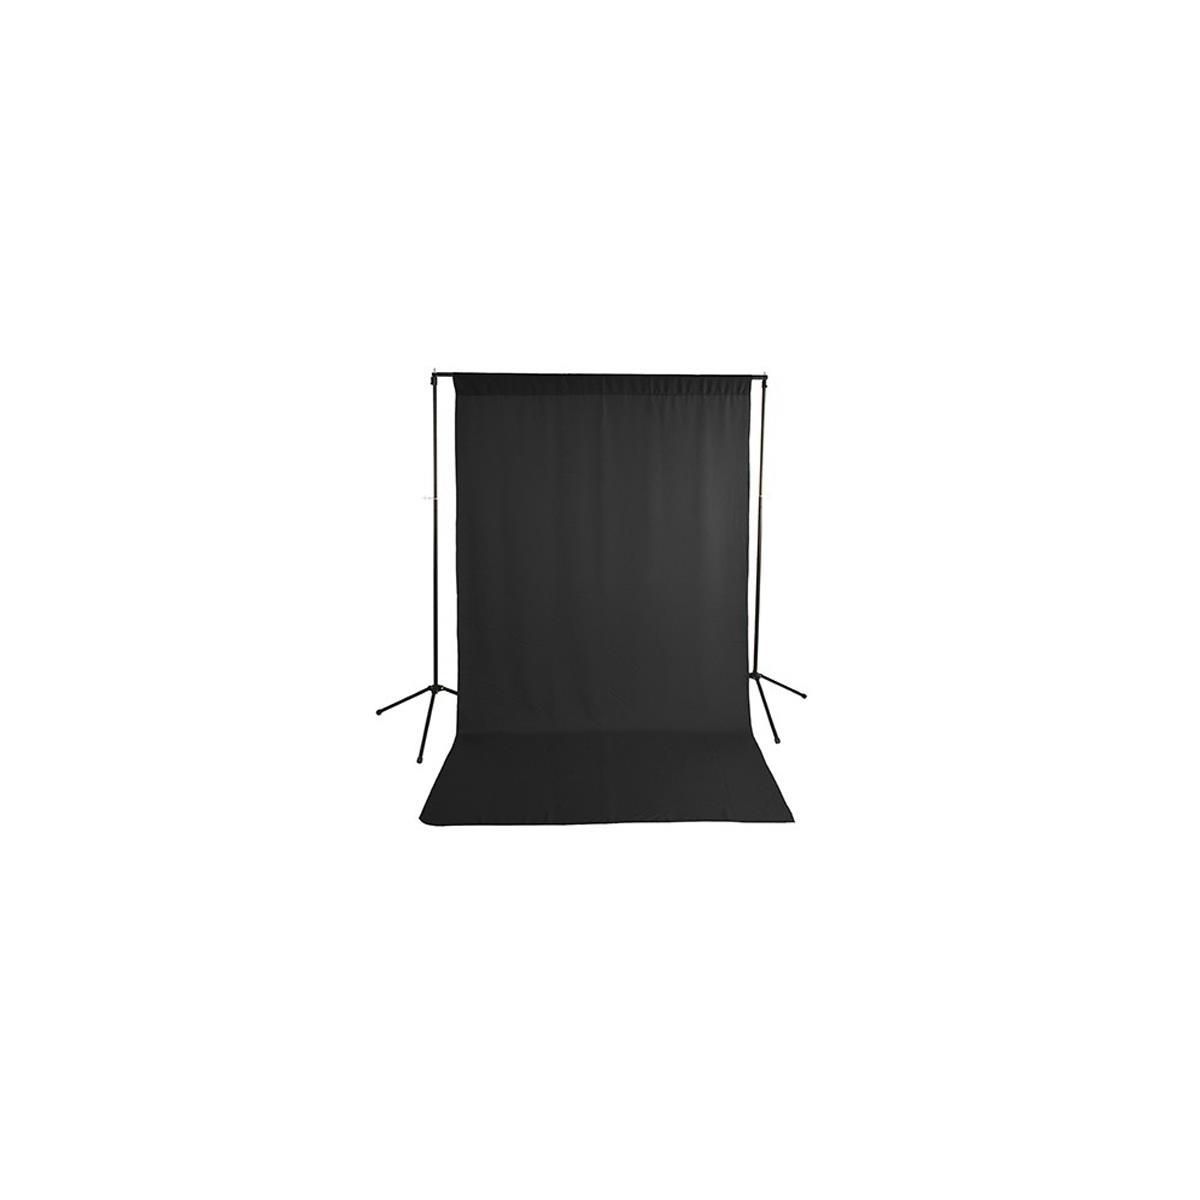 Image of Savage Economy Background Support Stand with 5x9' Black Backdrop